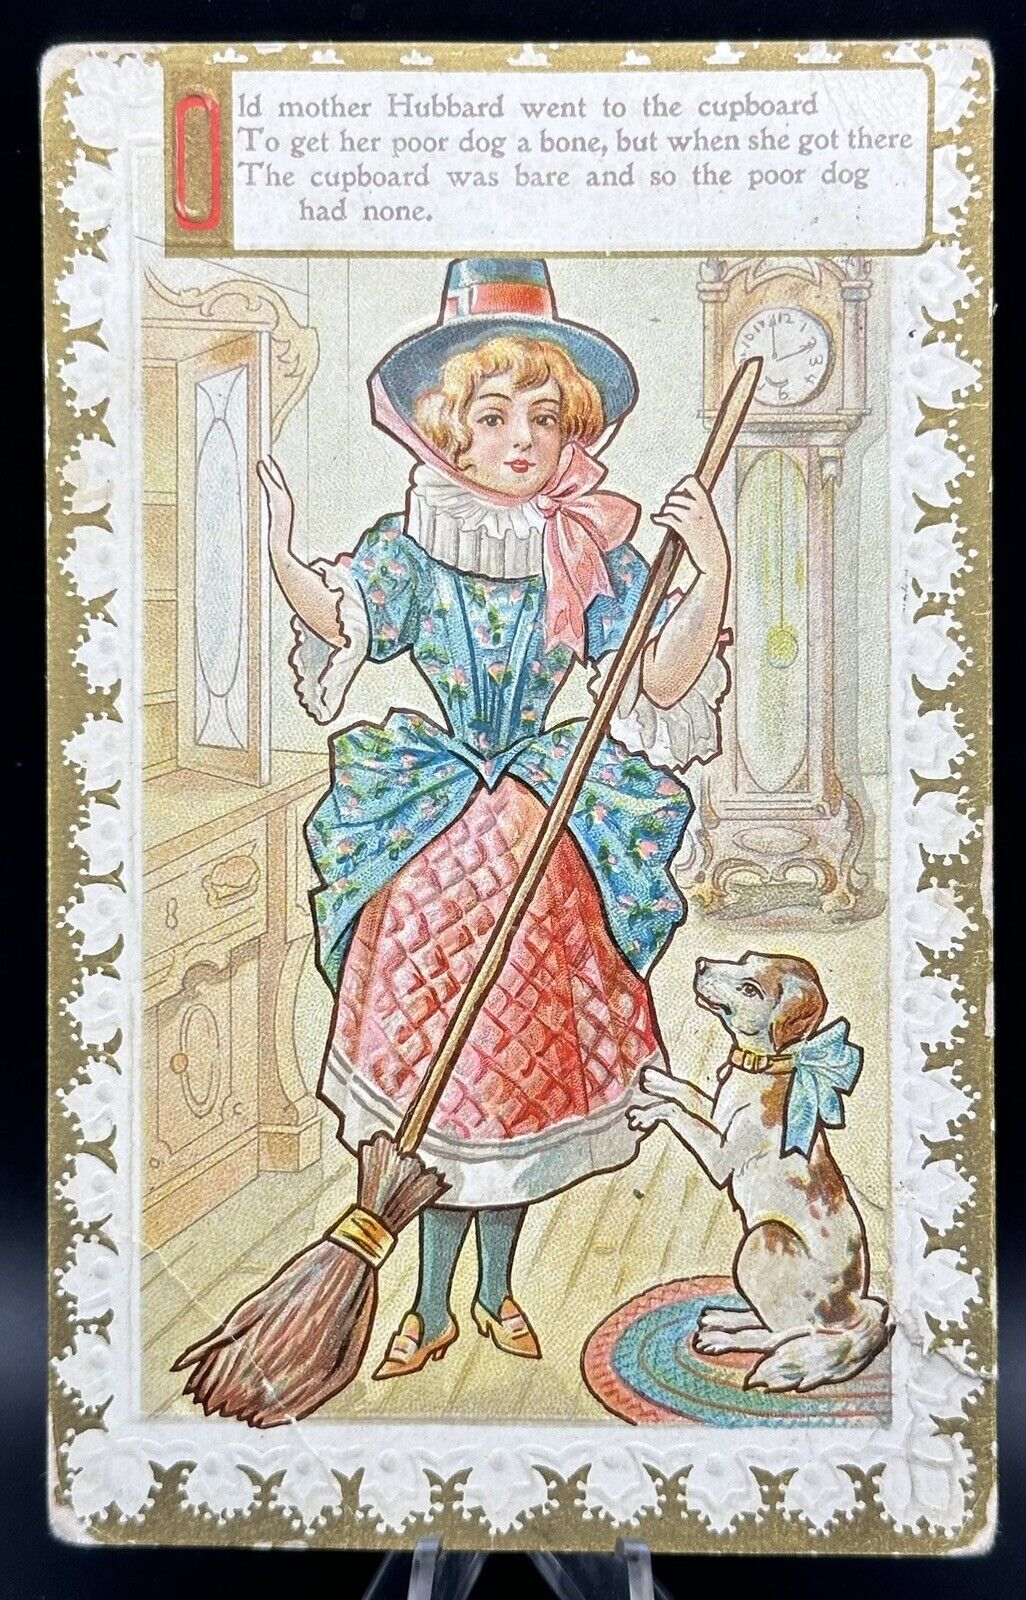 1907-1915 Old Mother Hubbard Went To The Cupboard Postcard Post Card